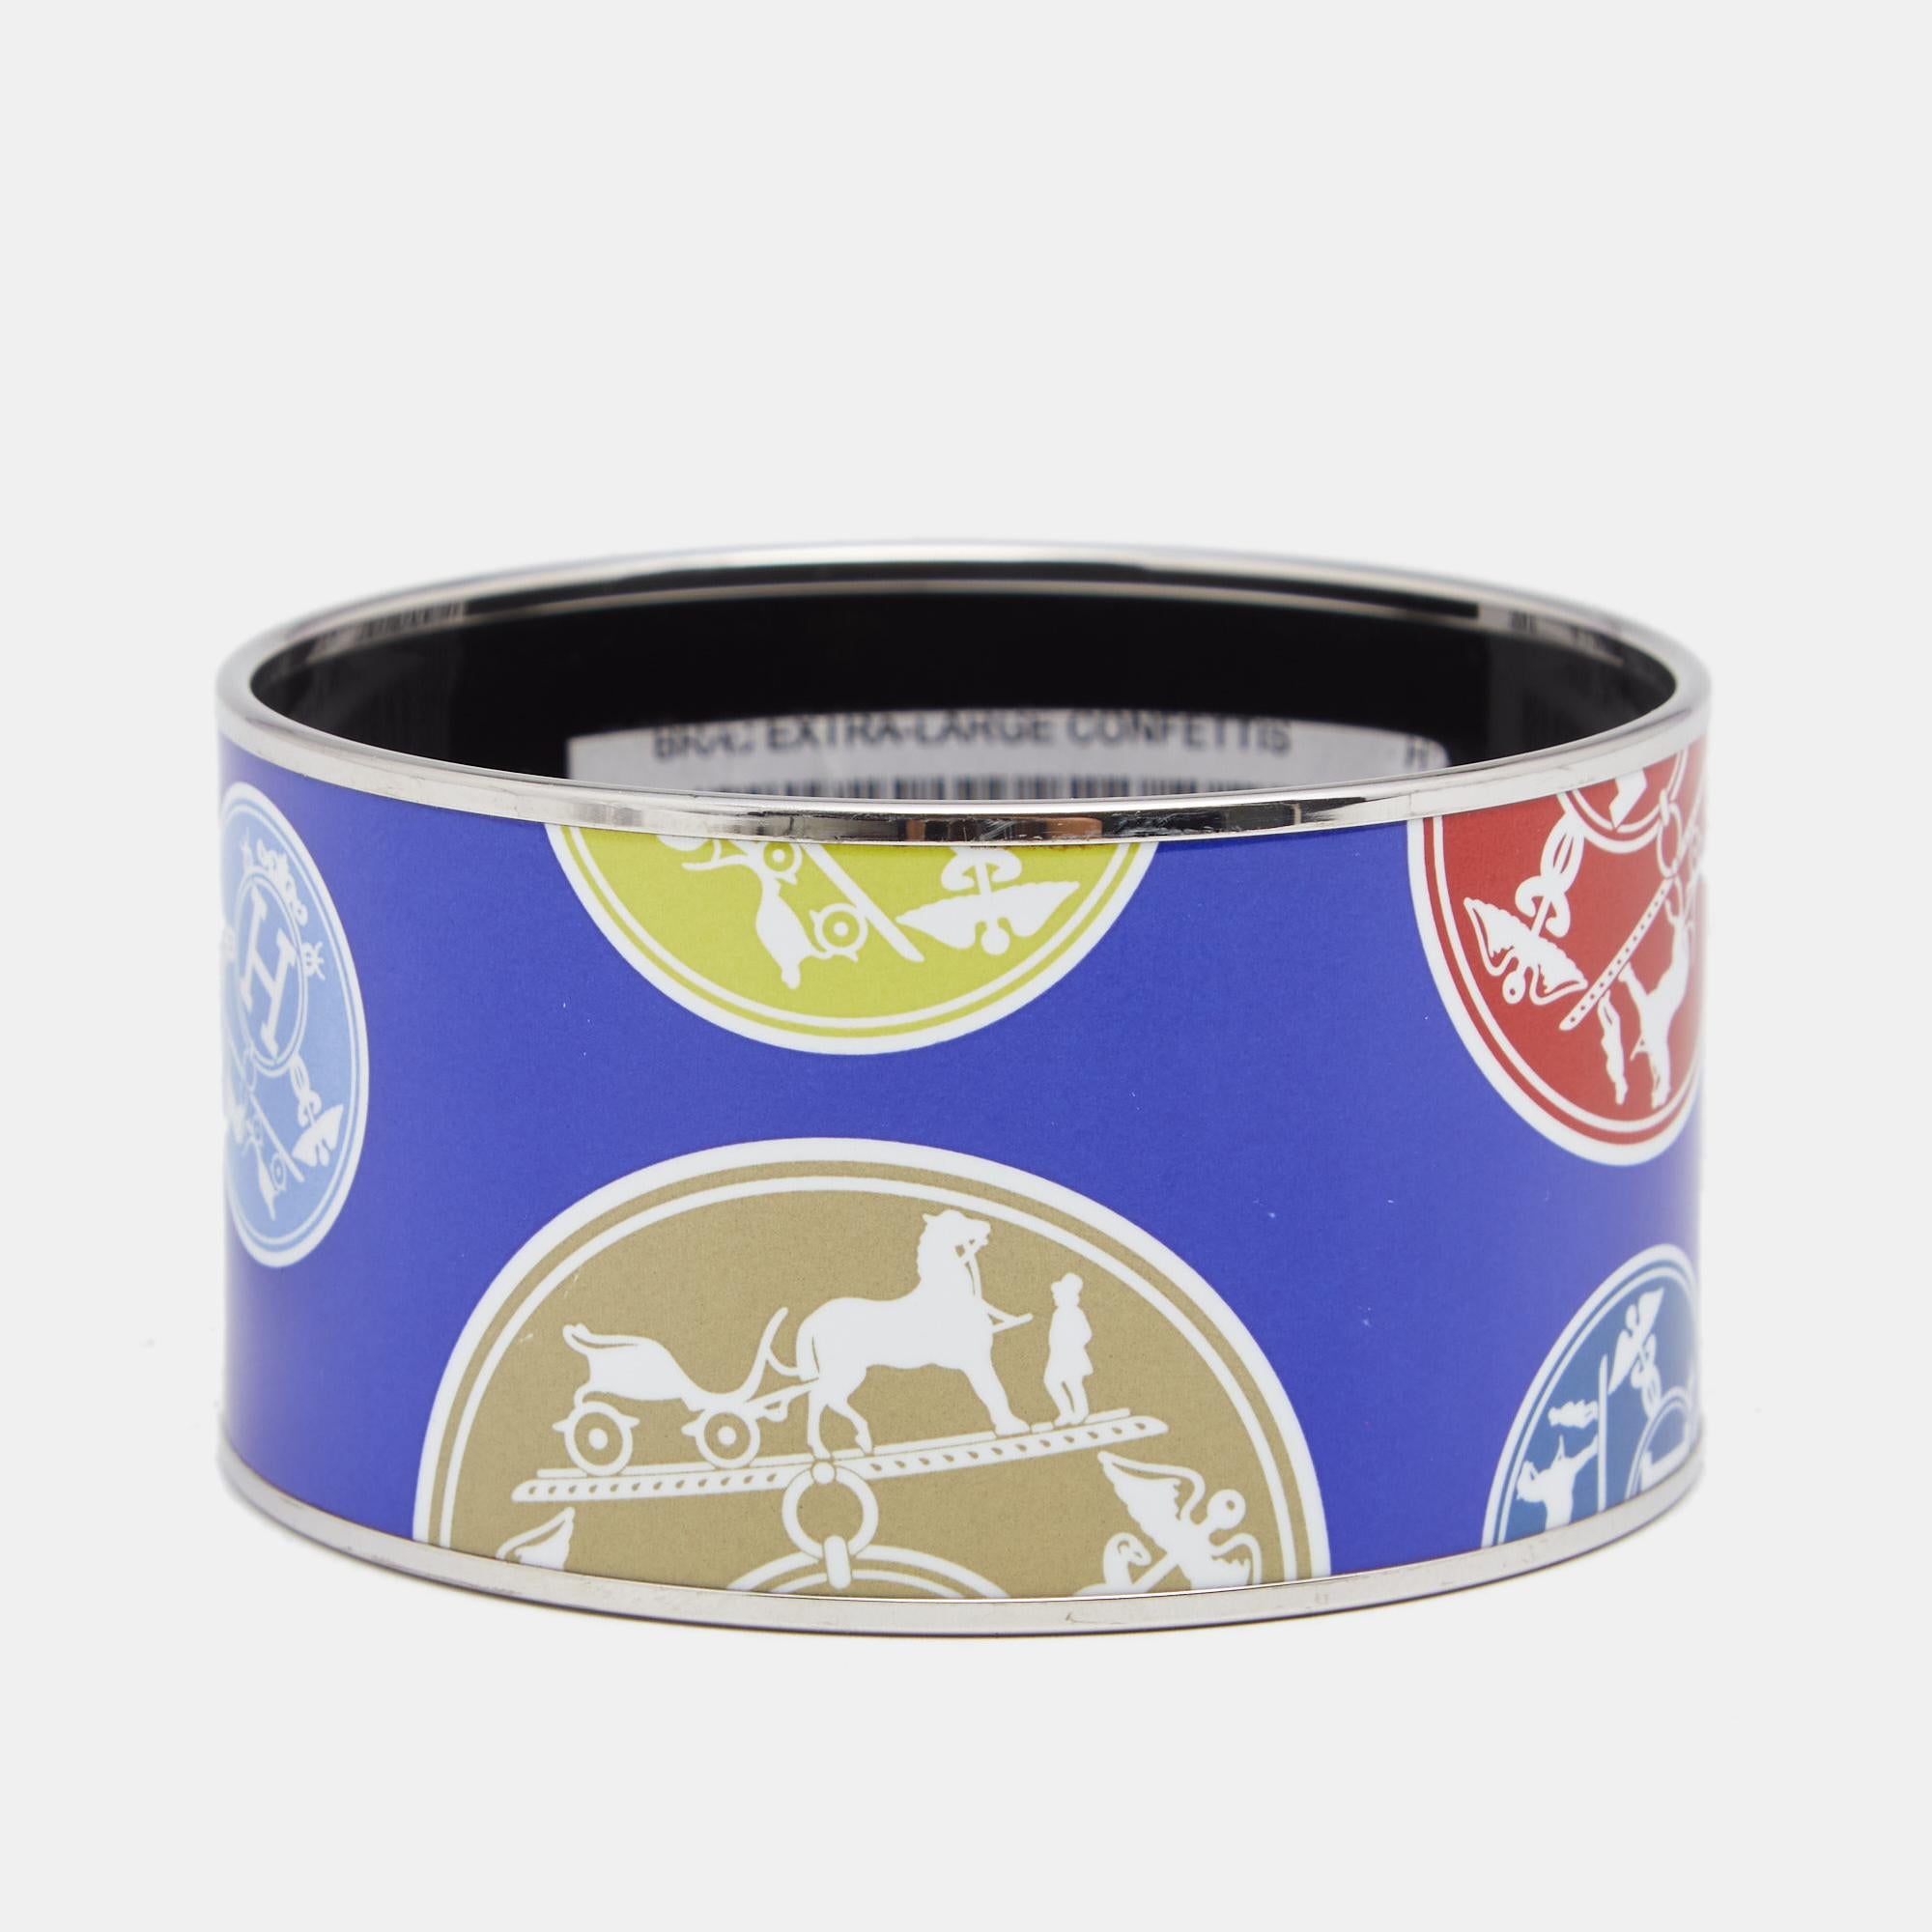 This Hermès Confettis D'Ex Libris bracelet is designed in a wide silhouette using palladium-plated metal and enamel. Wear it solo or stack it with other similar bracelets.

Includes: Price Tag ( Partially torn )